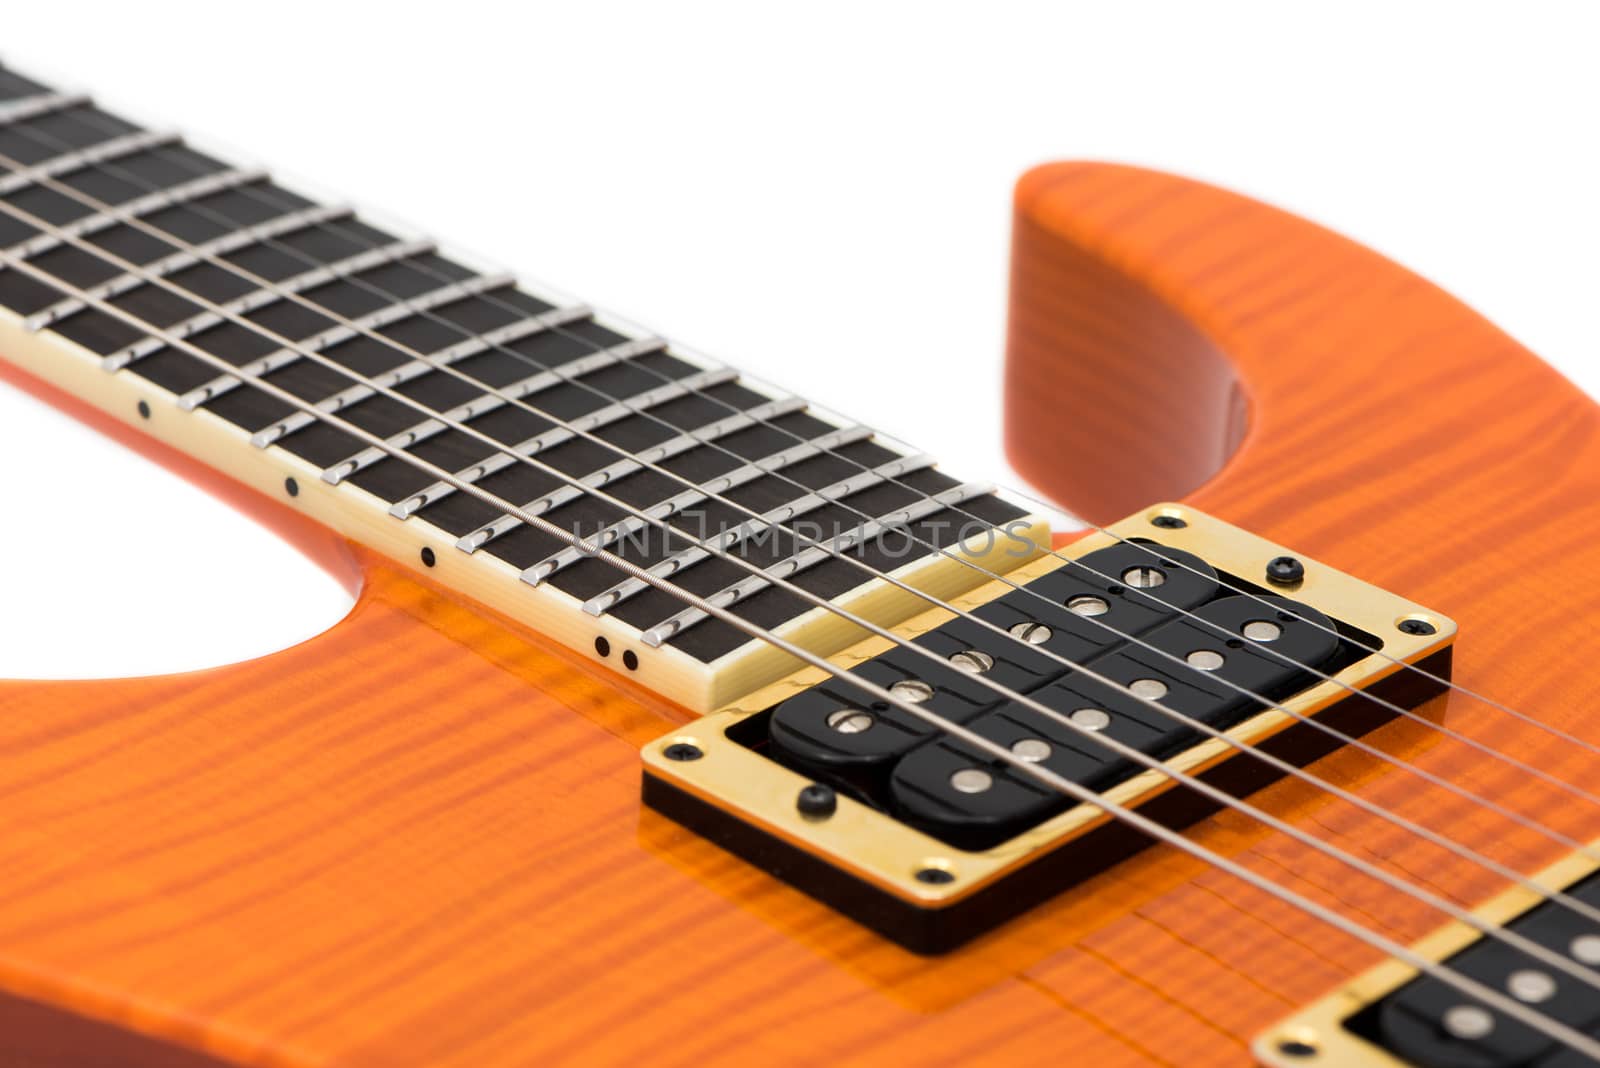 Detail of Orange Electric Guitar Body with Strings Isolated on White Background